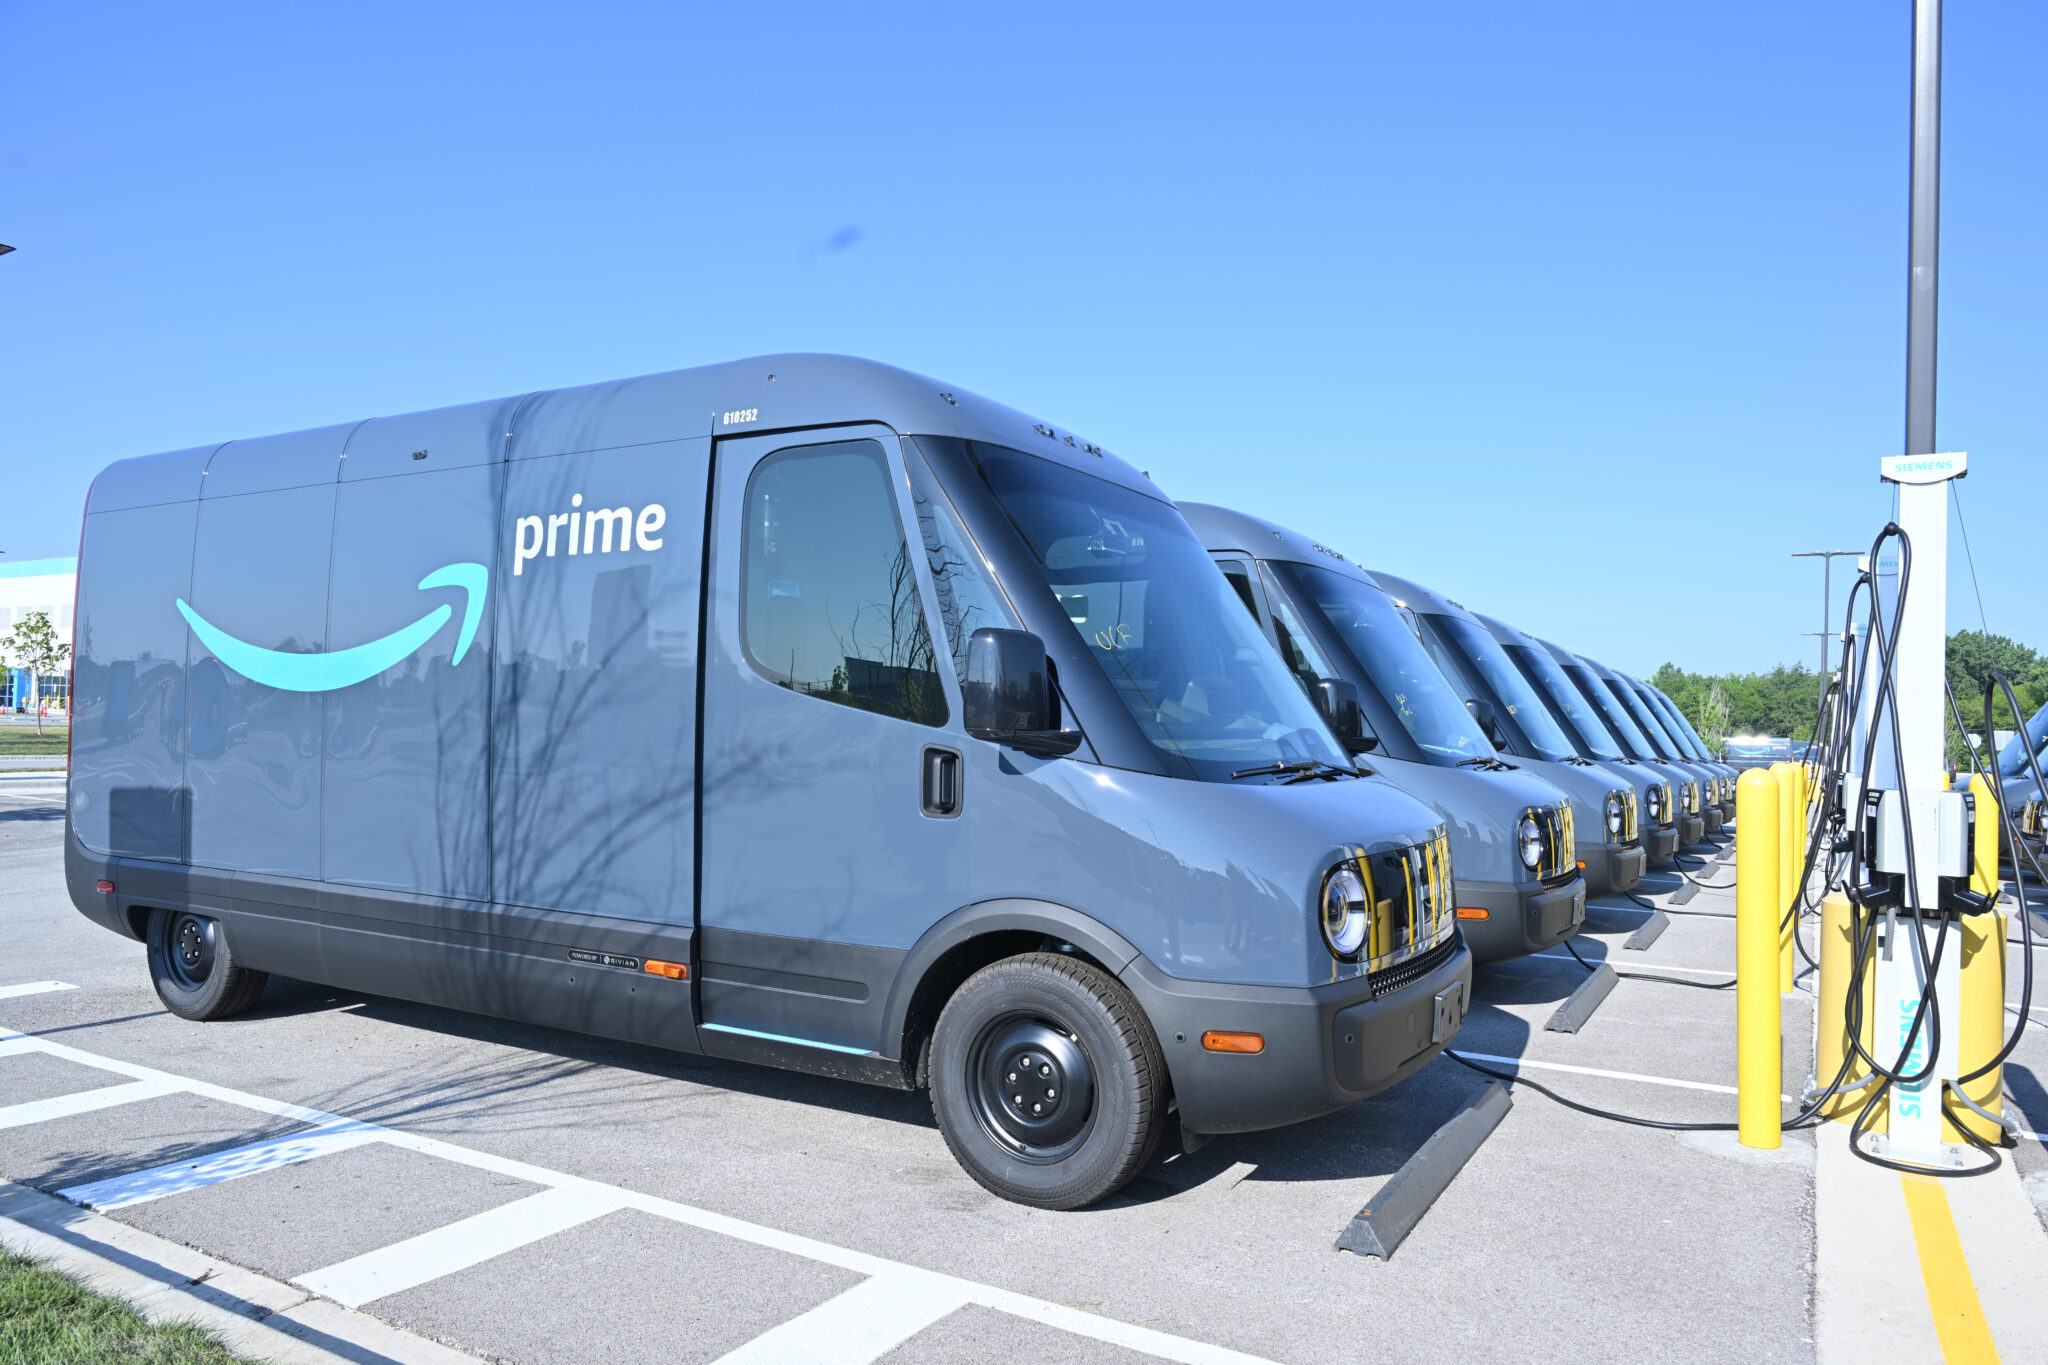 Amazon’s new electric vans will be making deliveries in over 100 U.S